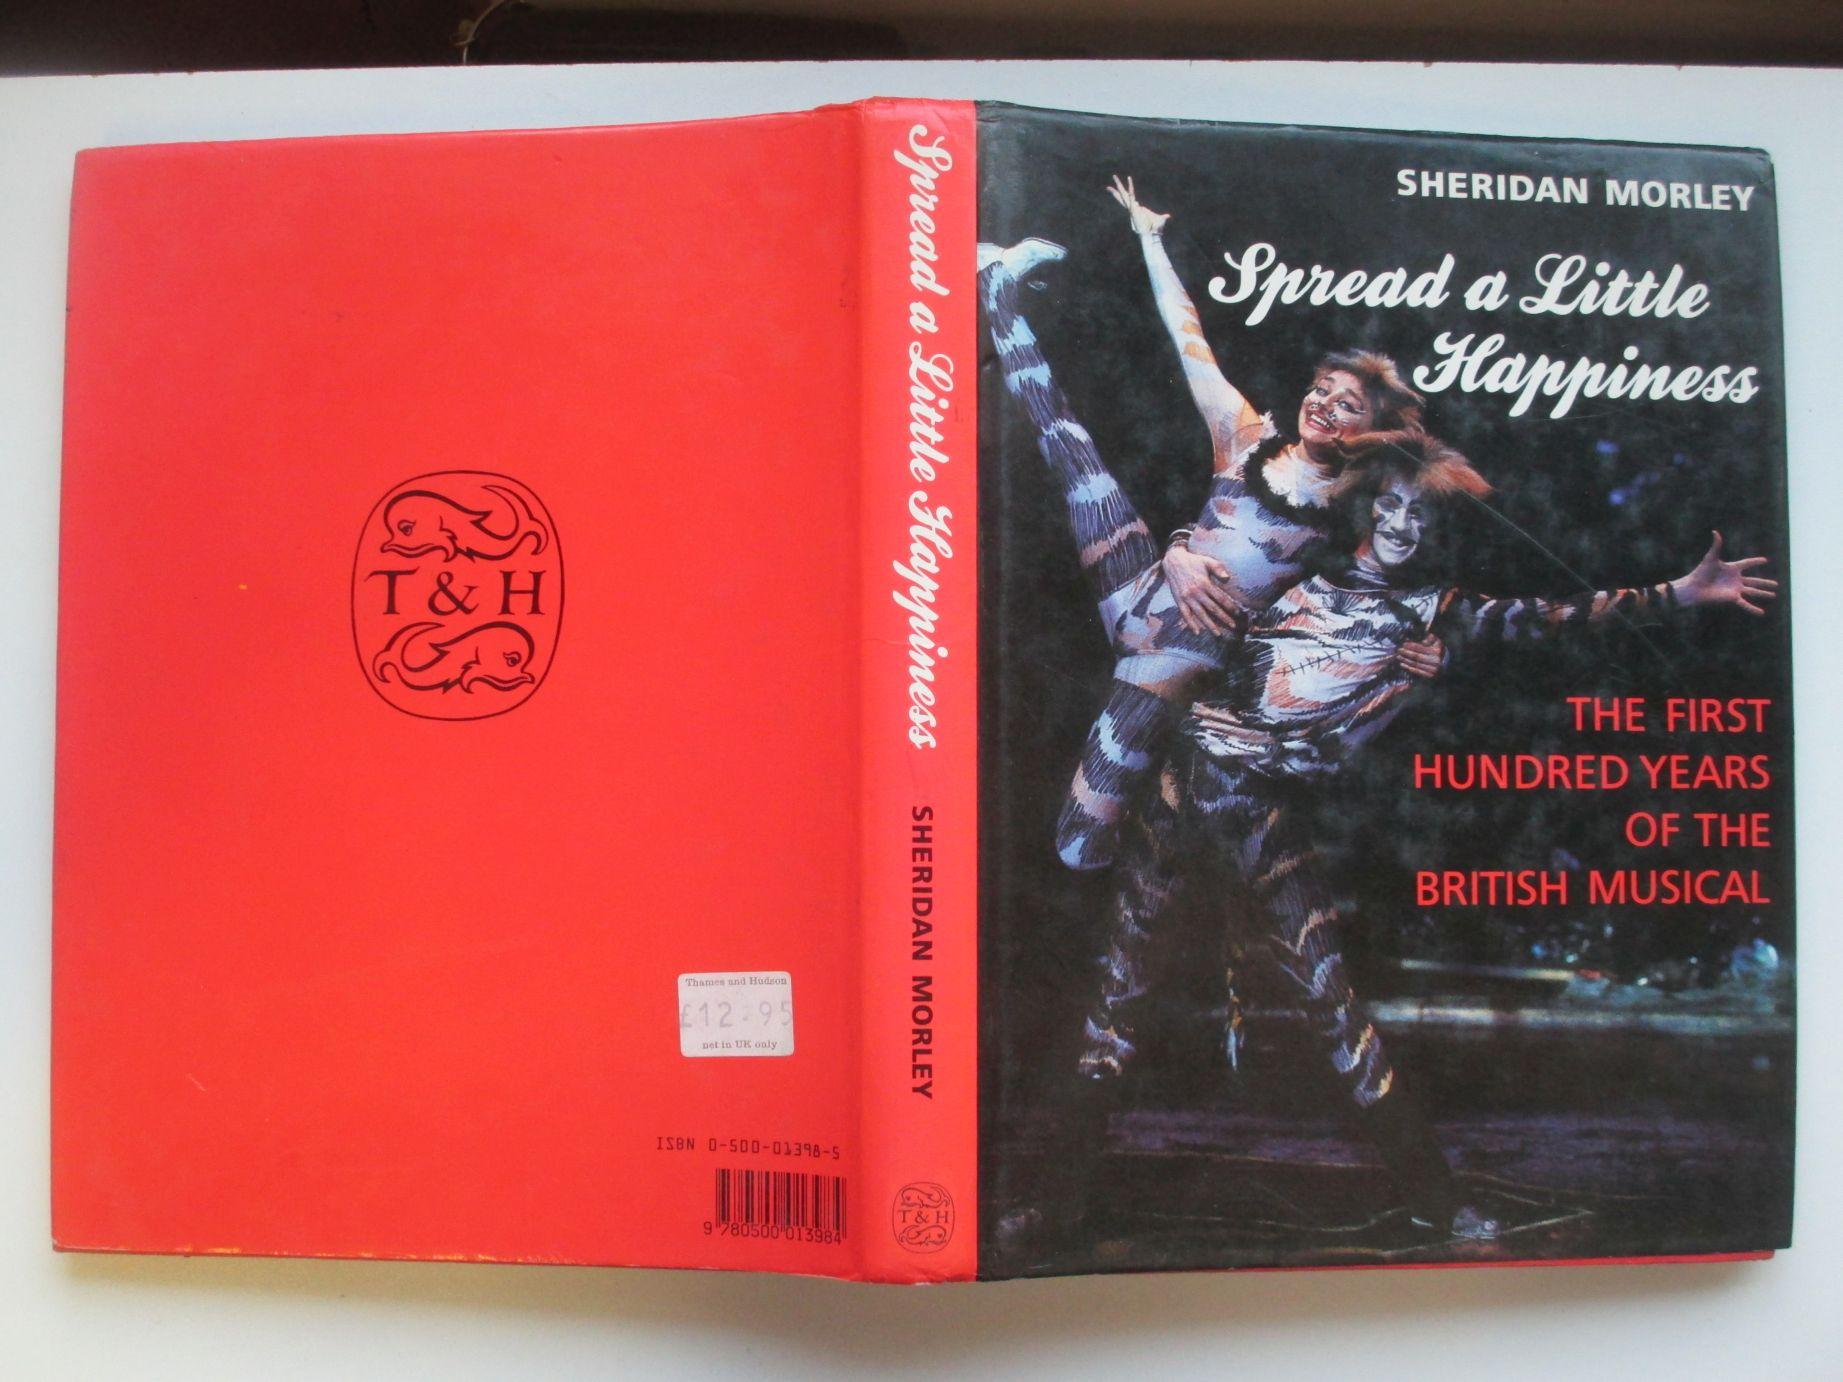 Spread a little happiness: the first hundred years of the British musical - Morley, Sheridan